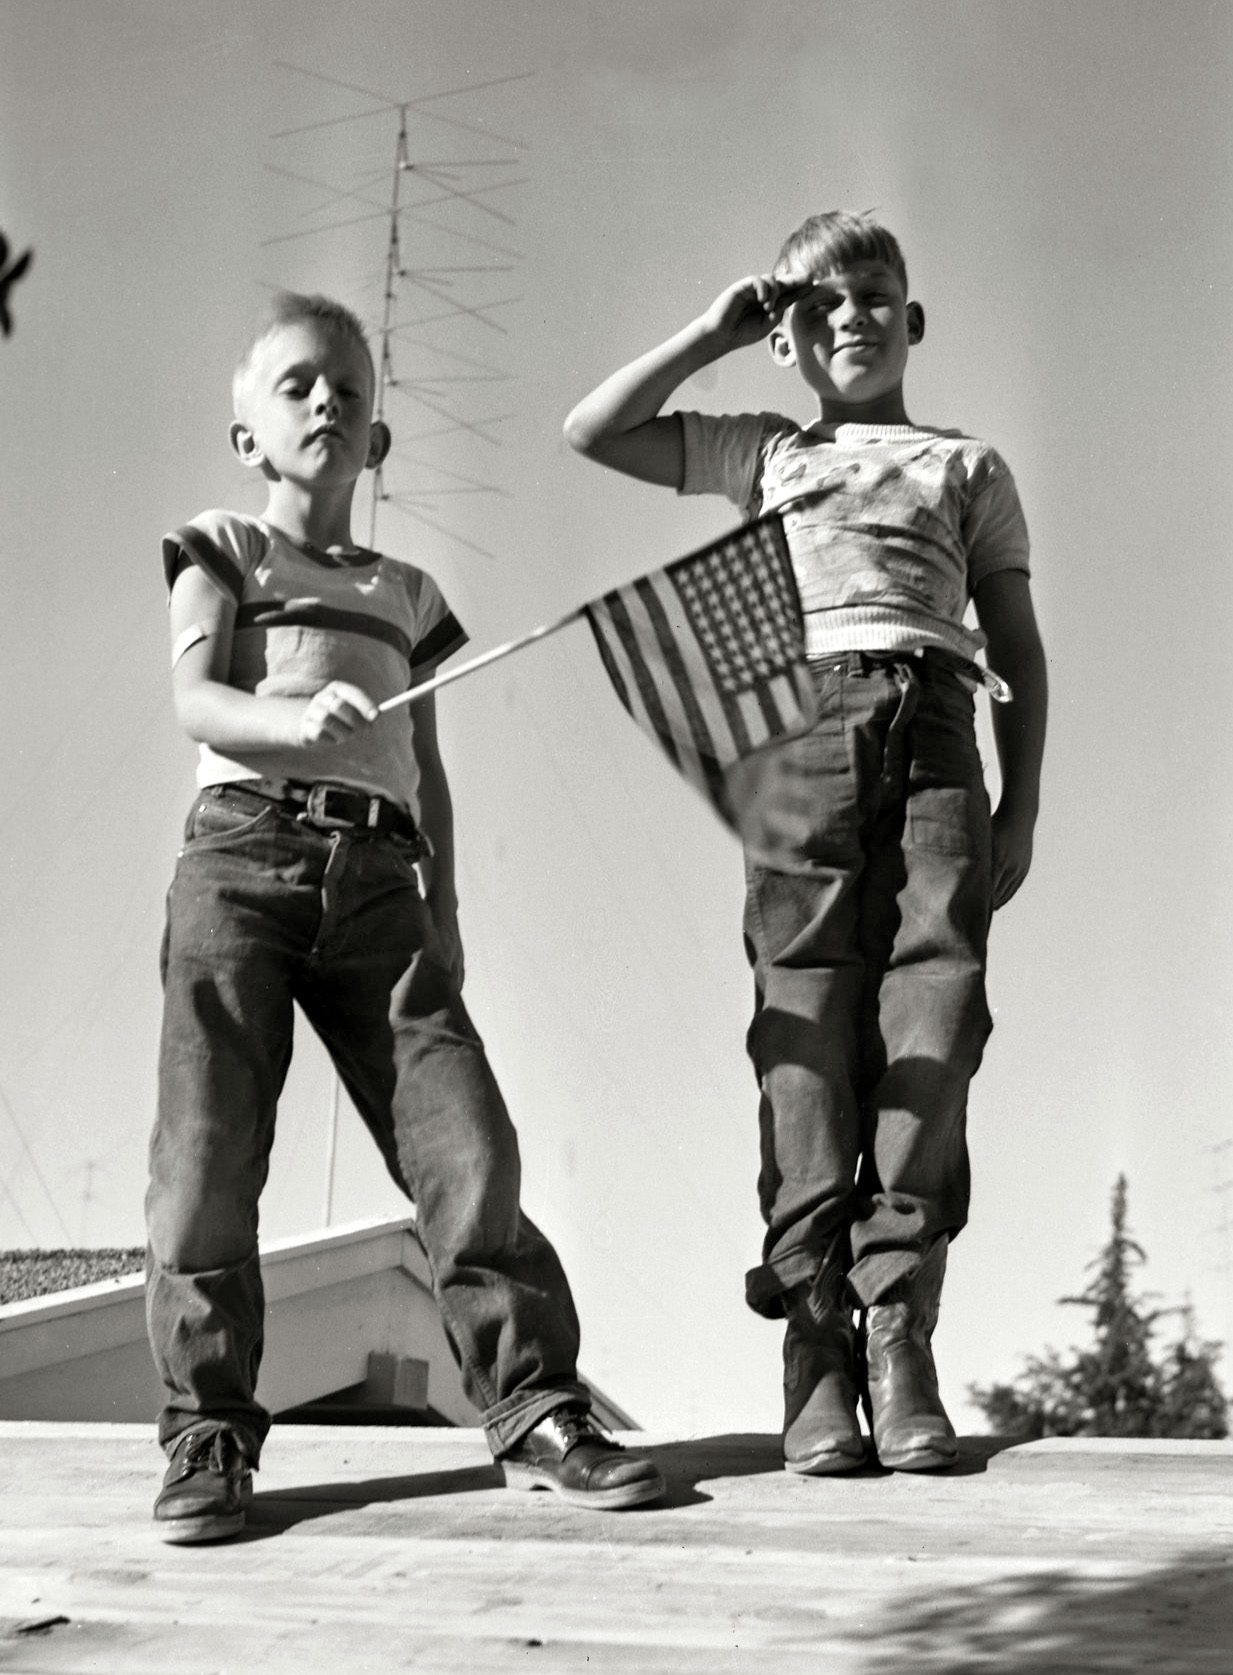 Bill Bliss and friend playing on the roof in the mid-1950s in Southern California. I don't know for sure if this was actually taken on the Fourth of July but it's patriotic nonetheless. View full size.